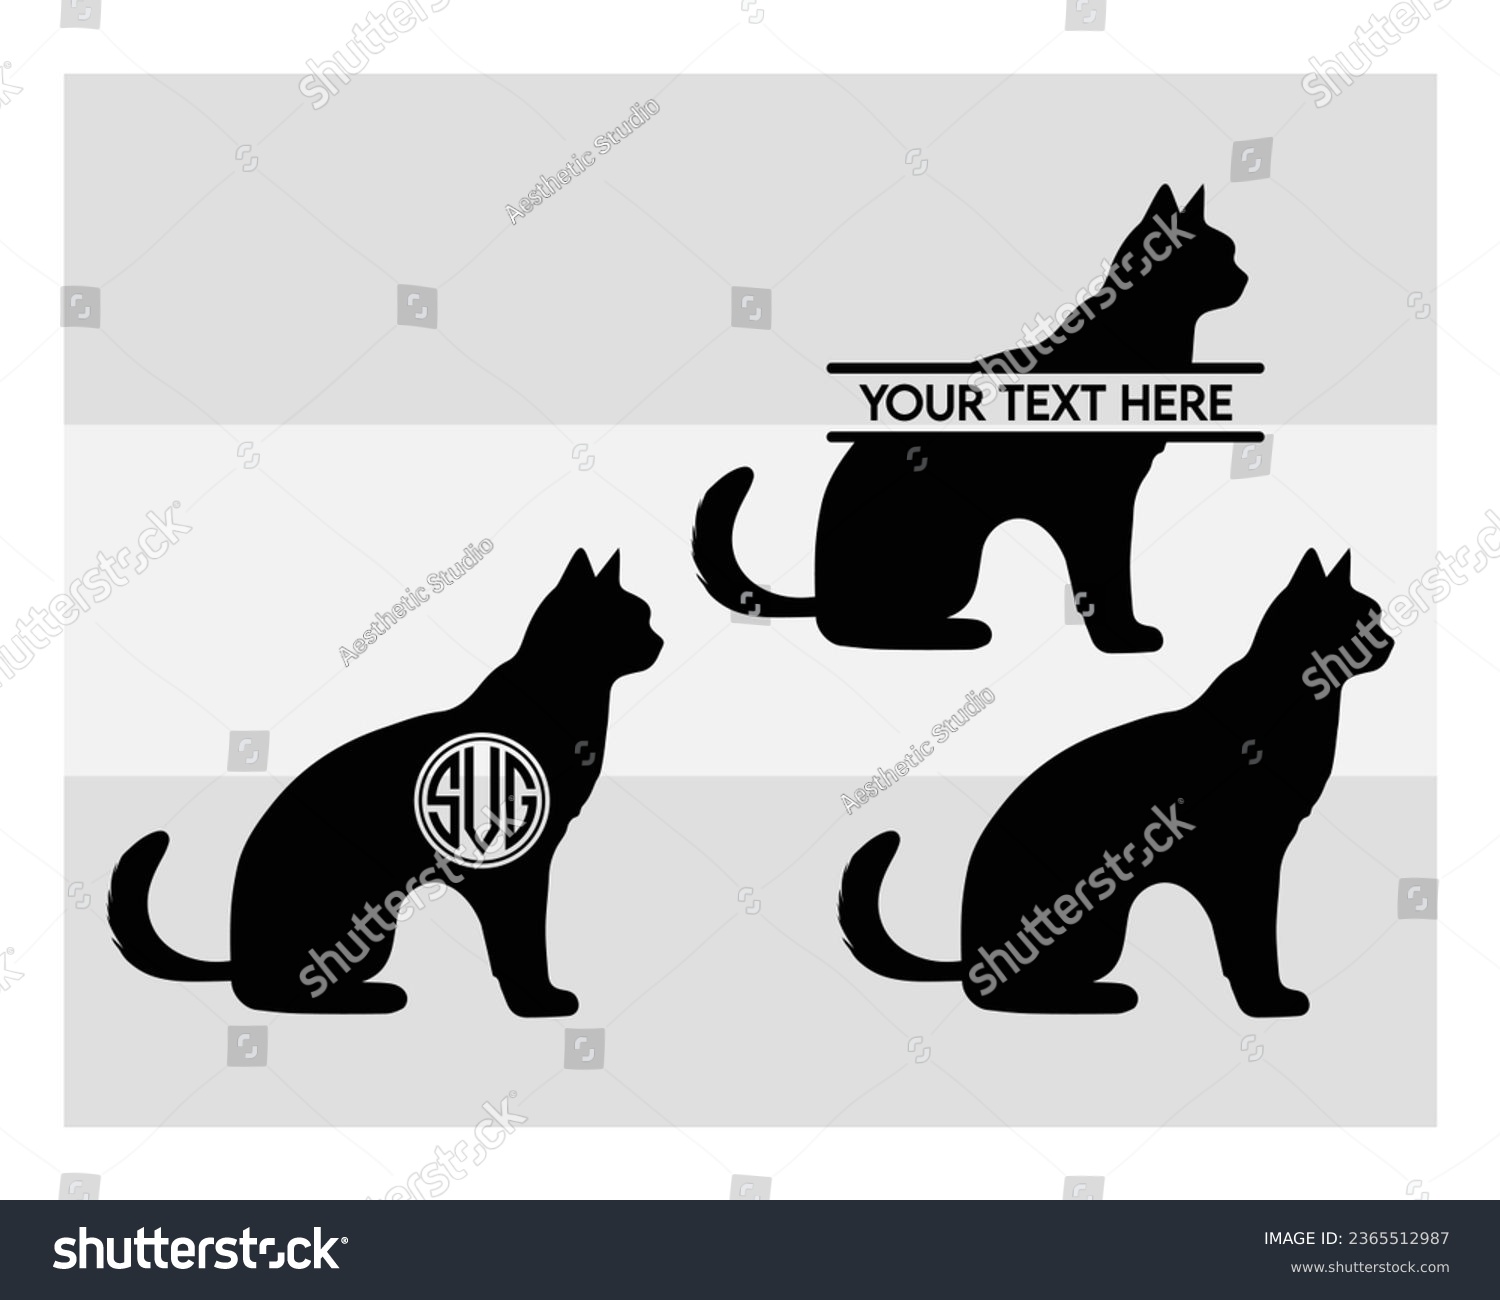 SVG of Cat Svg, Cats, Baby Elephant Baby, Cats Silhouette, Cats Funny, cat bunny, Cute, Cats Black, Animal Svg, Animal Silhouette svg